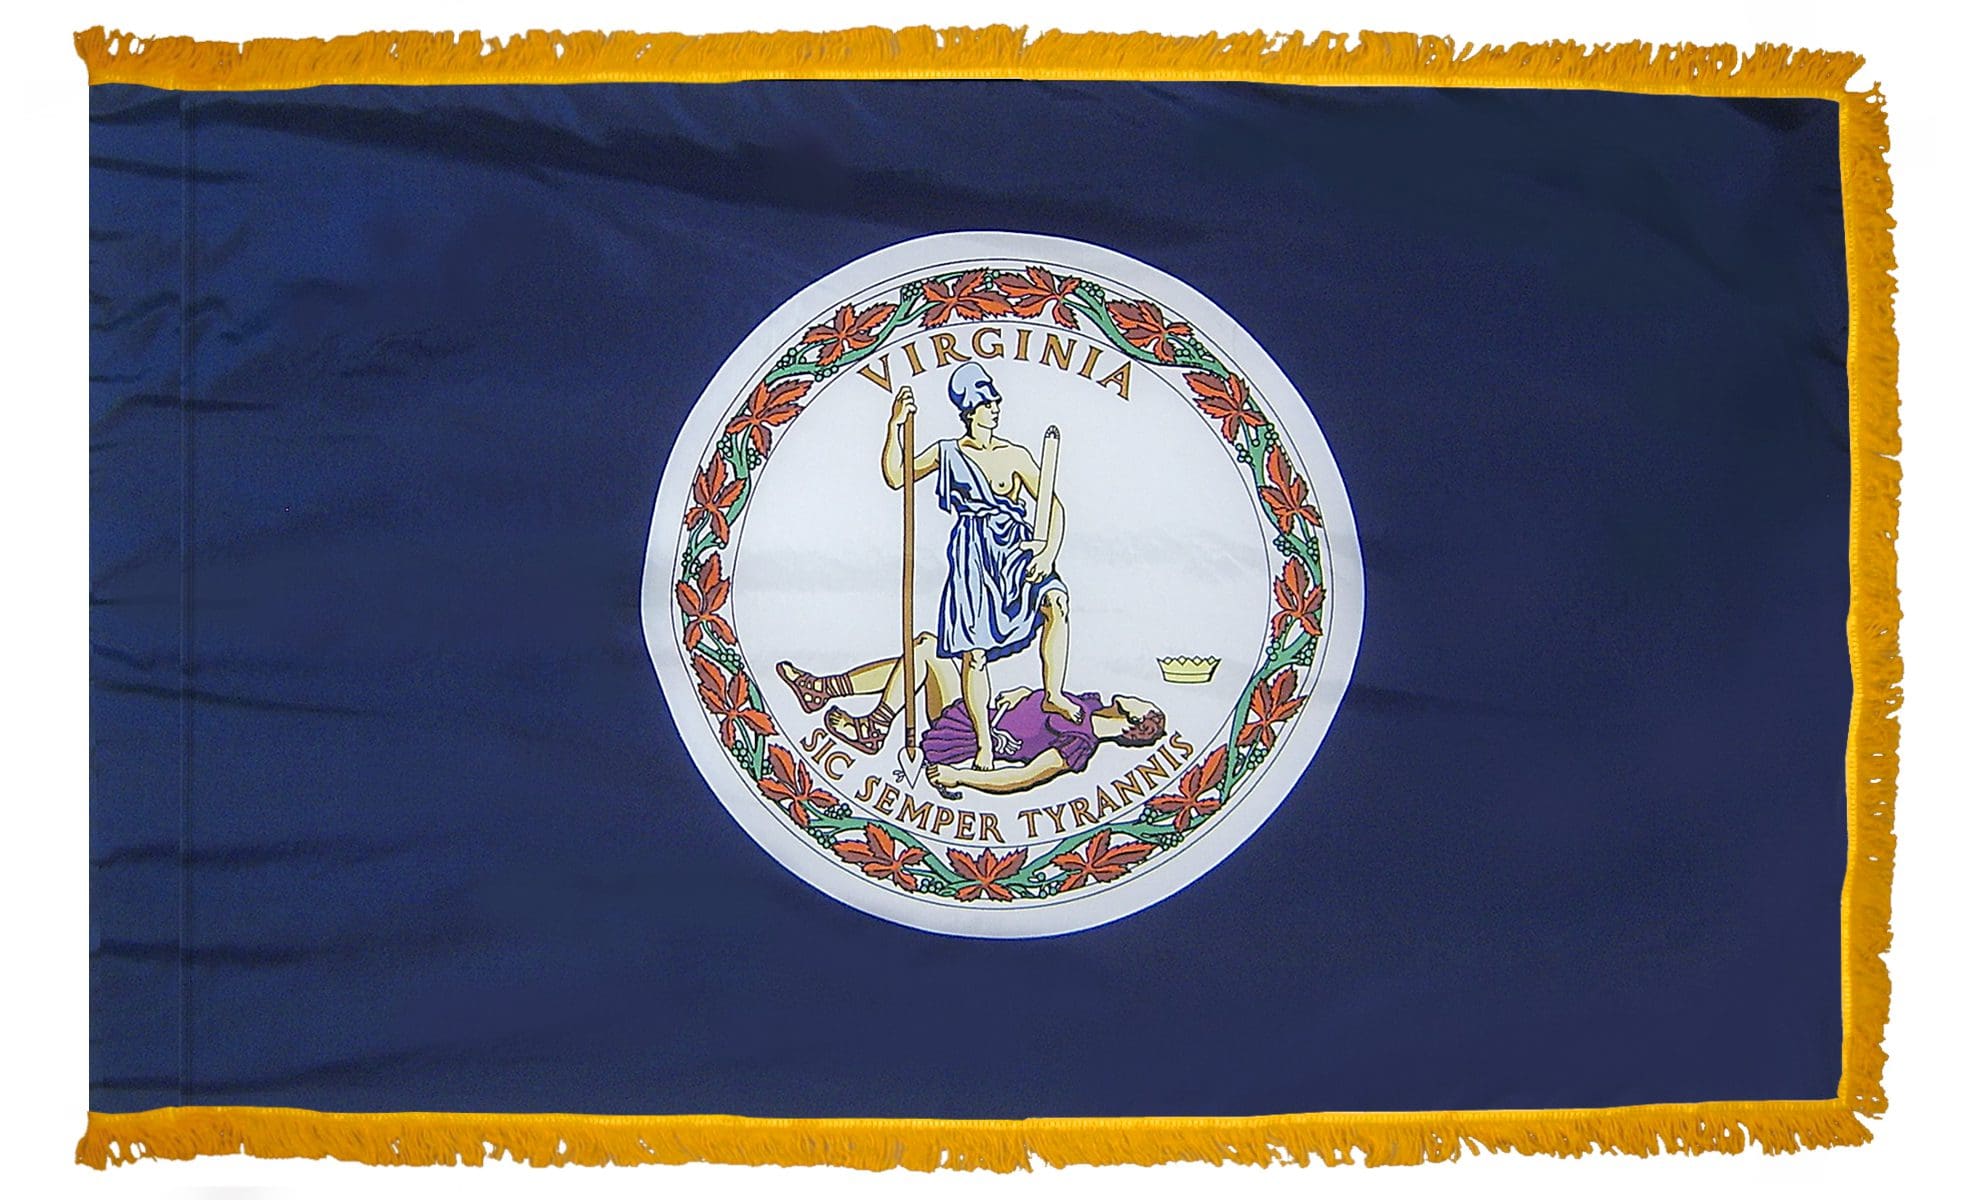 Virginia State Flag 3x5 or 4x6 ft. (fringed)